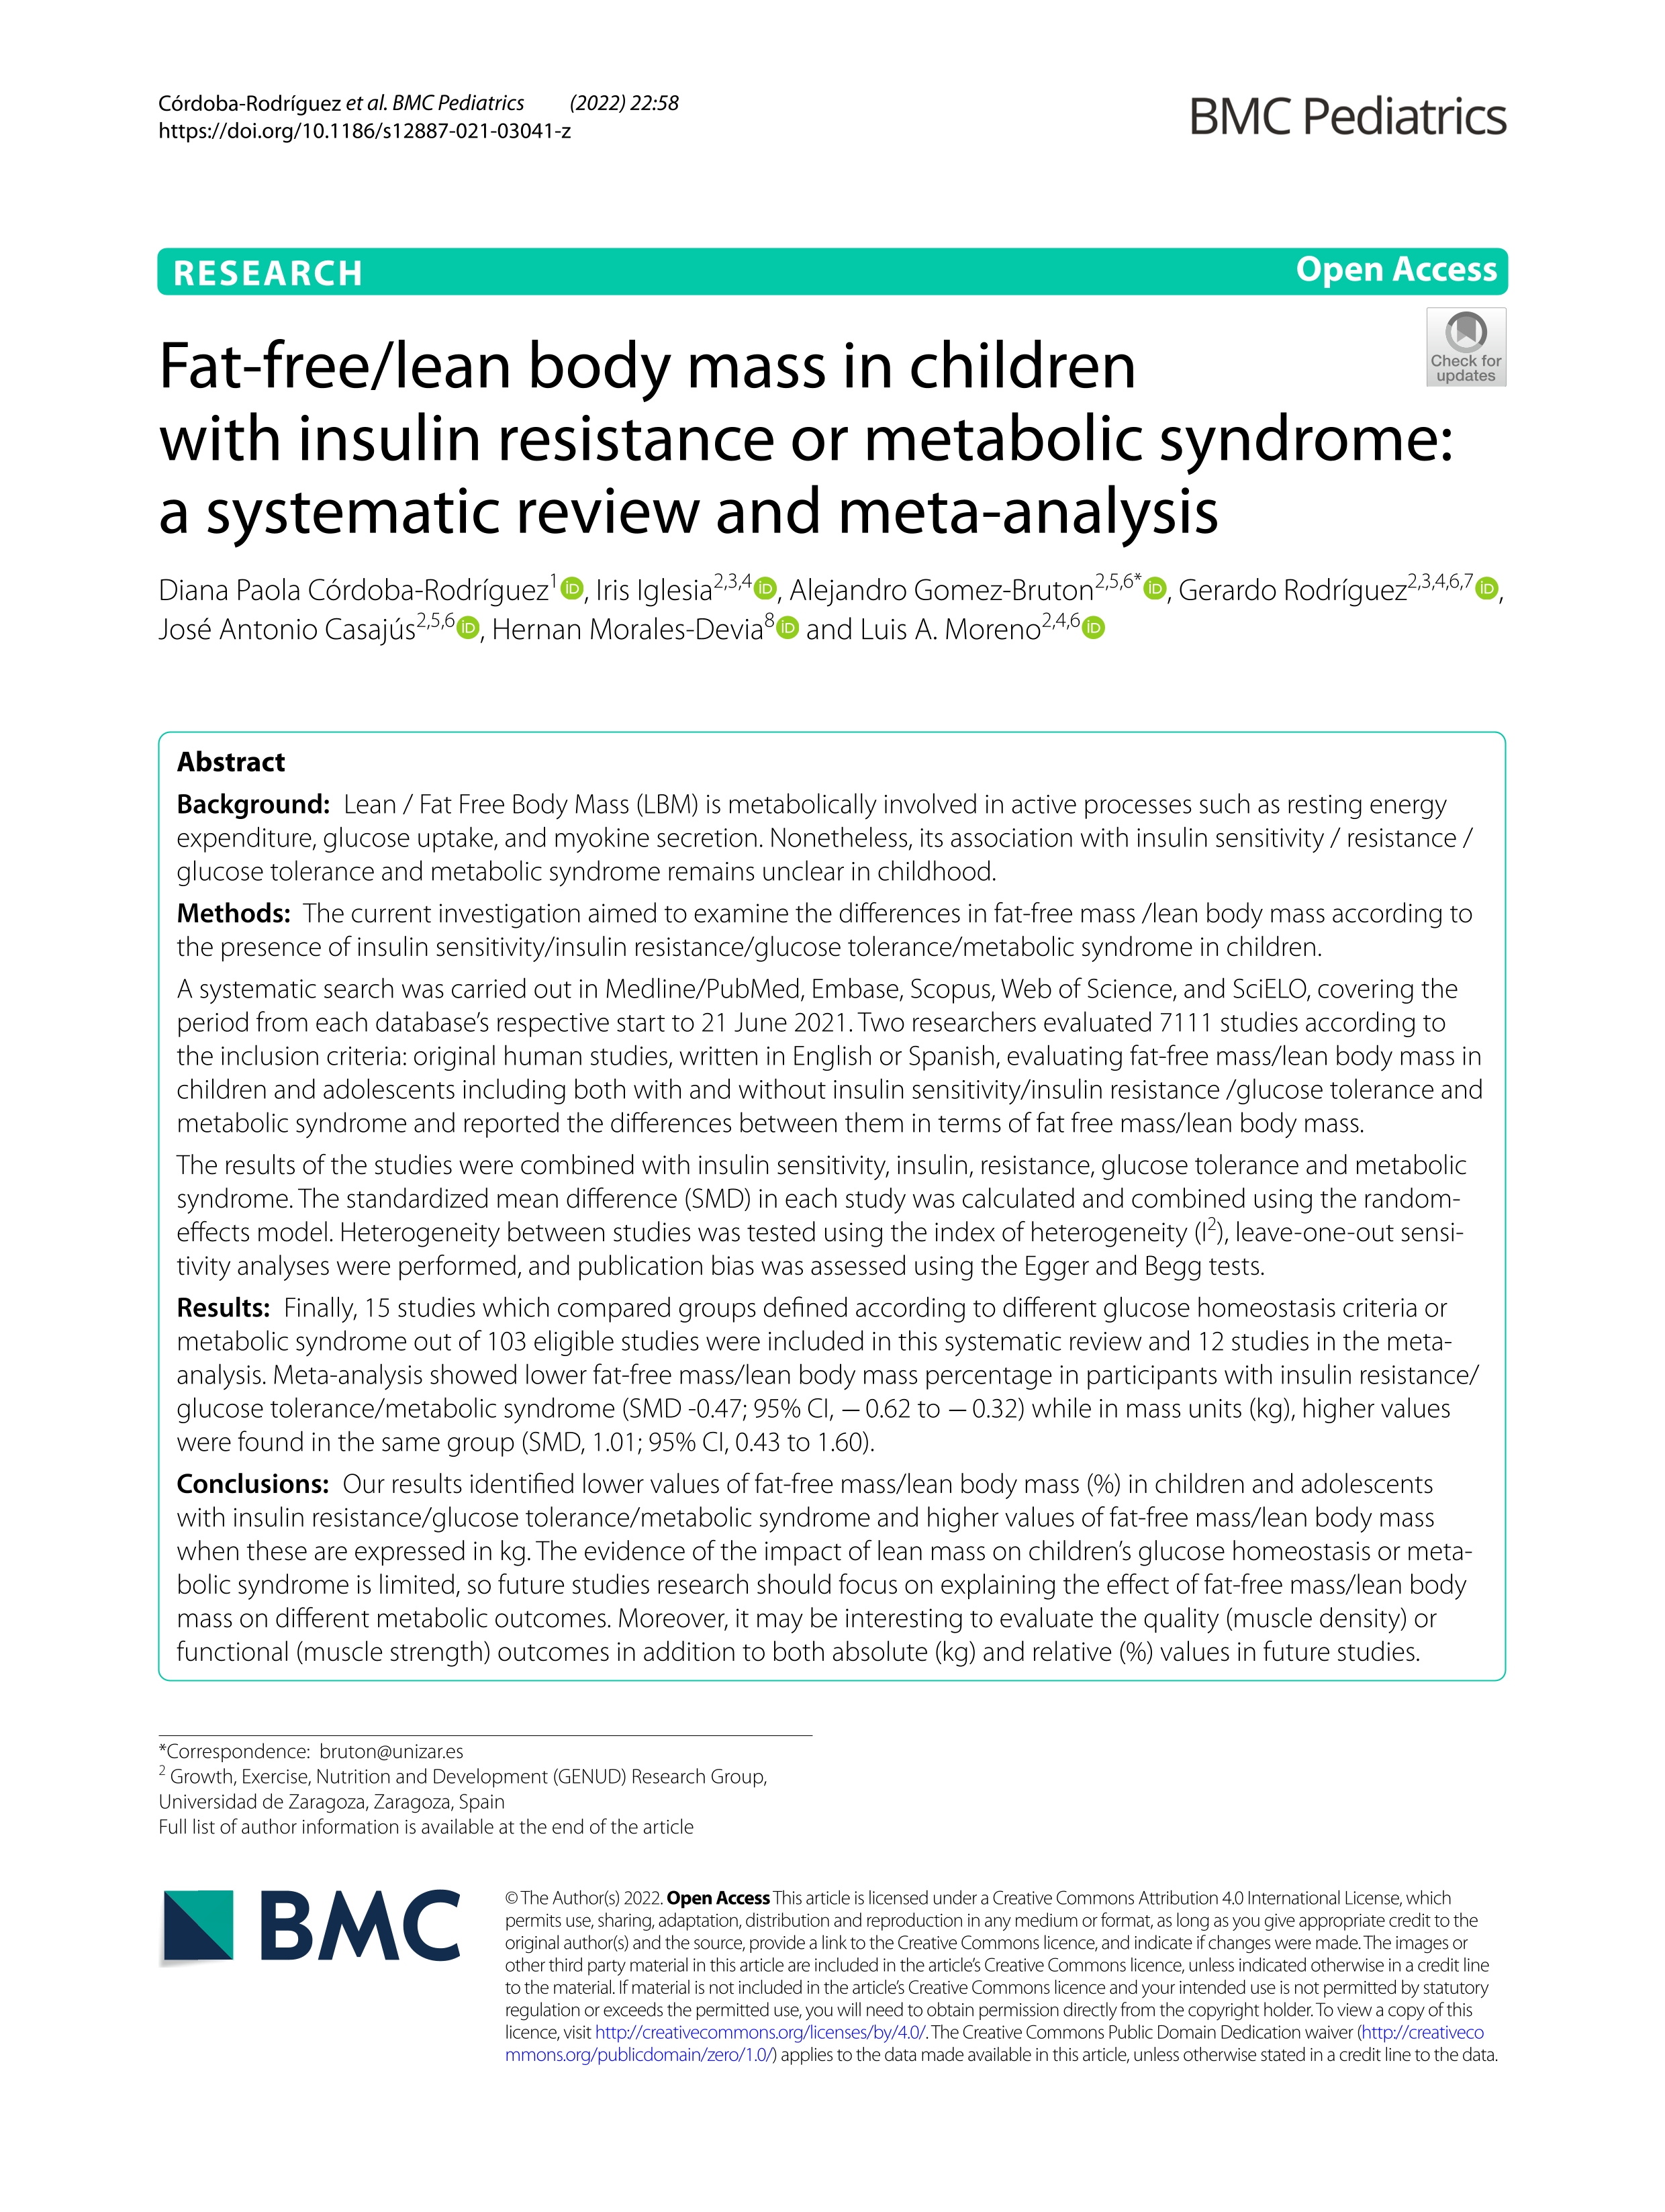 Fat-free/lean body mass in children with insulin resistance or metabolic syndrome: a systematic review and meta-analysis